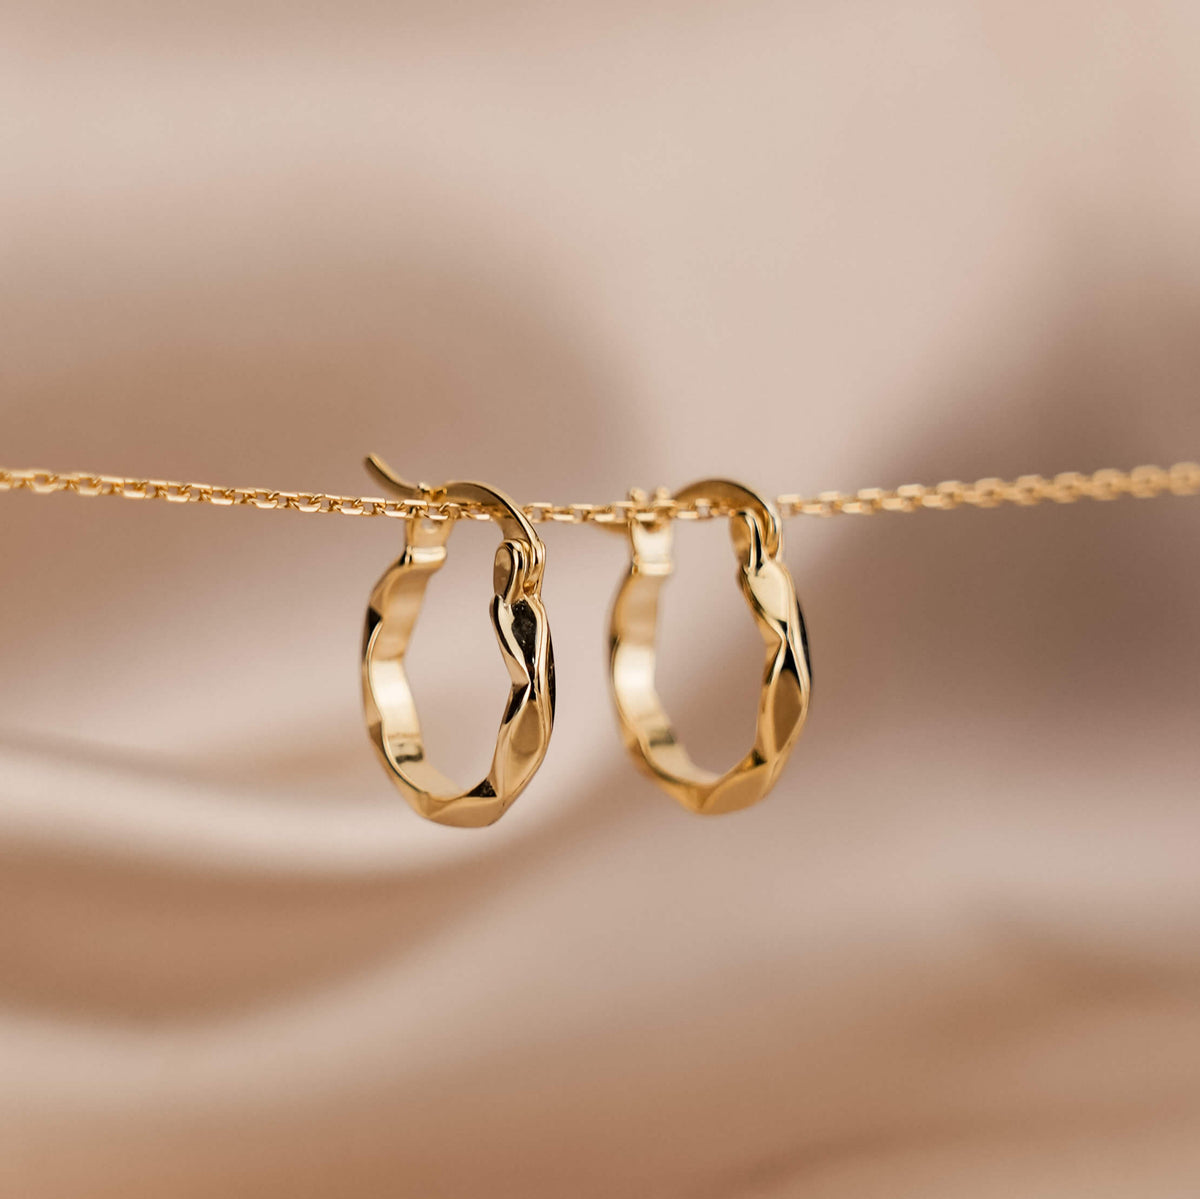 Gold hoop earrings made from high quality sterling silver plated in 18 karat gold. They have a subtle twist design. The earrings are hanging from a fine, dainty gold chain in front of pink silk.